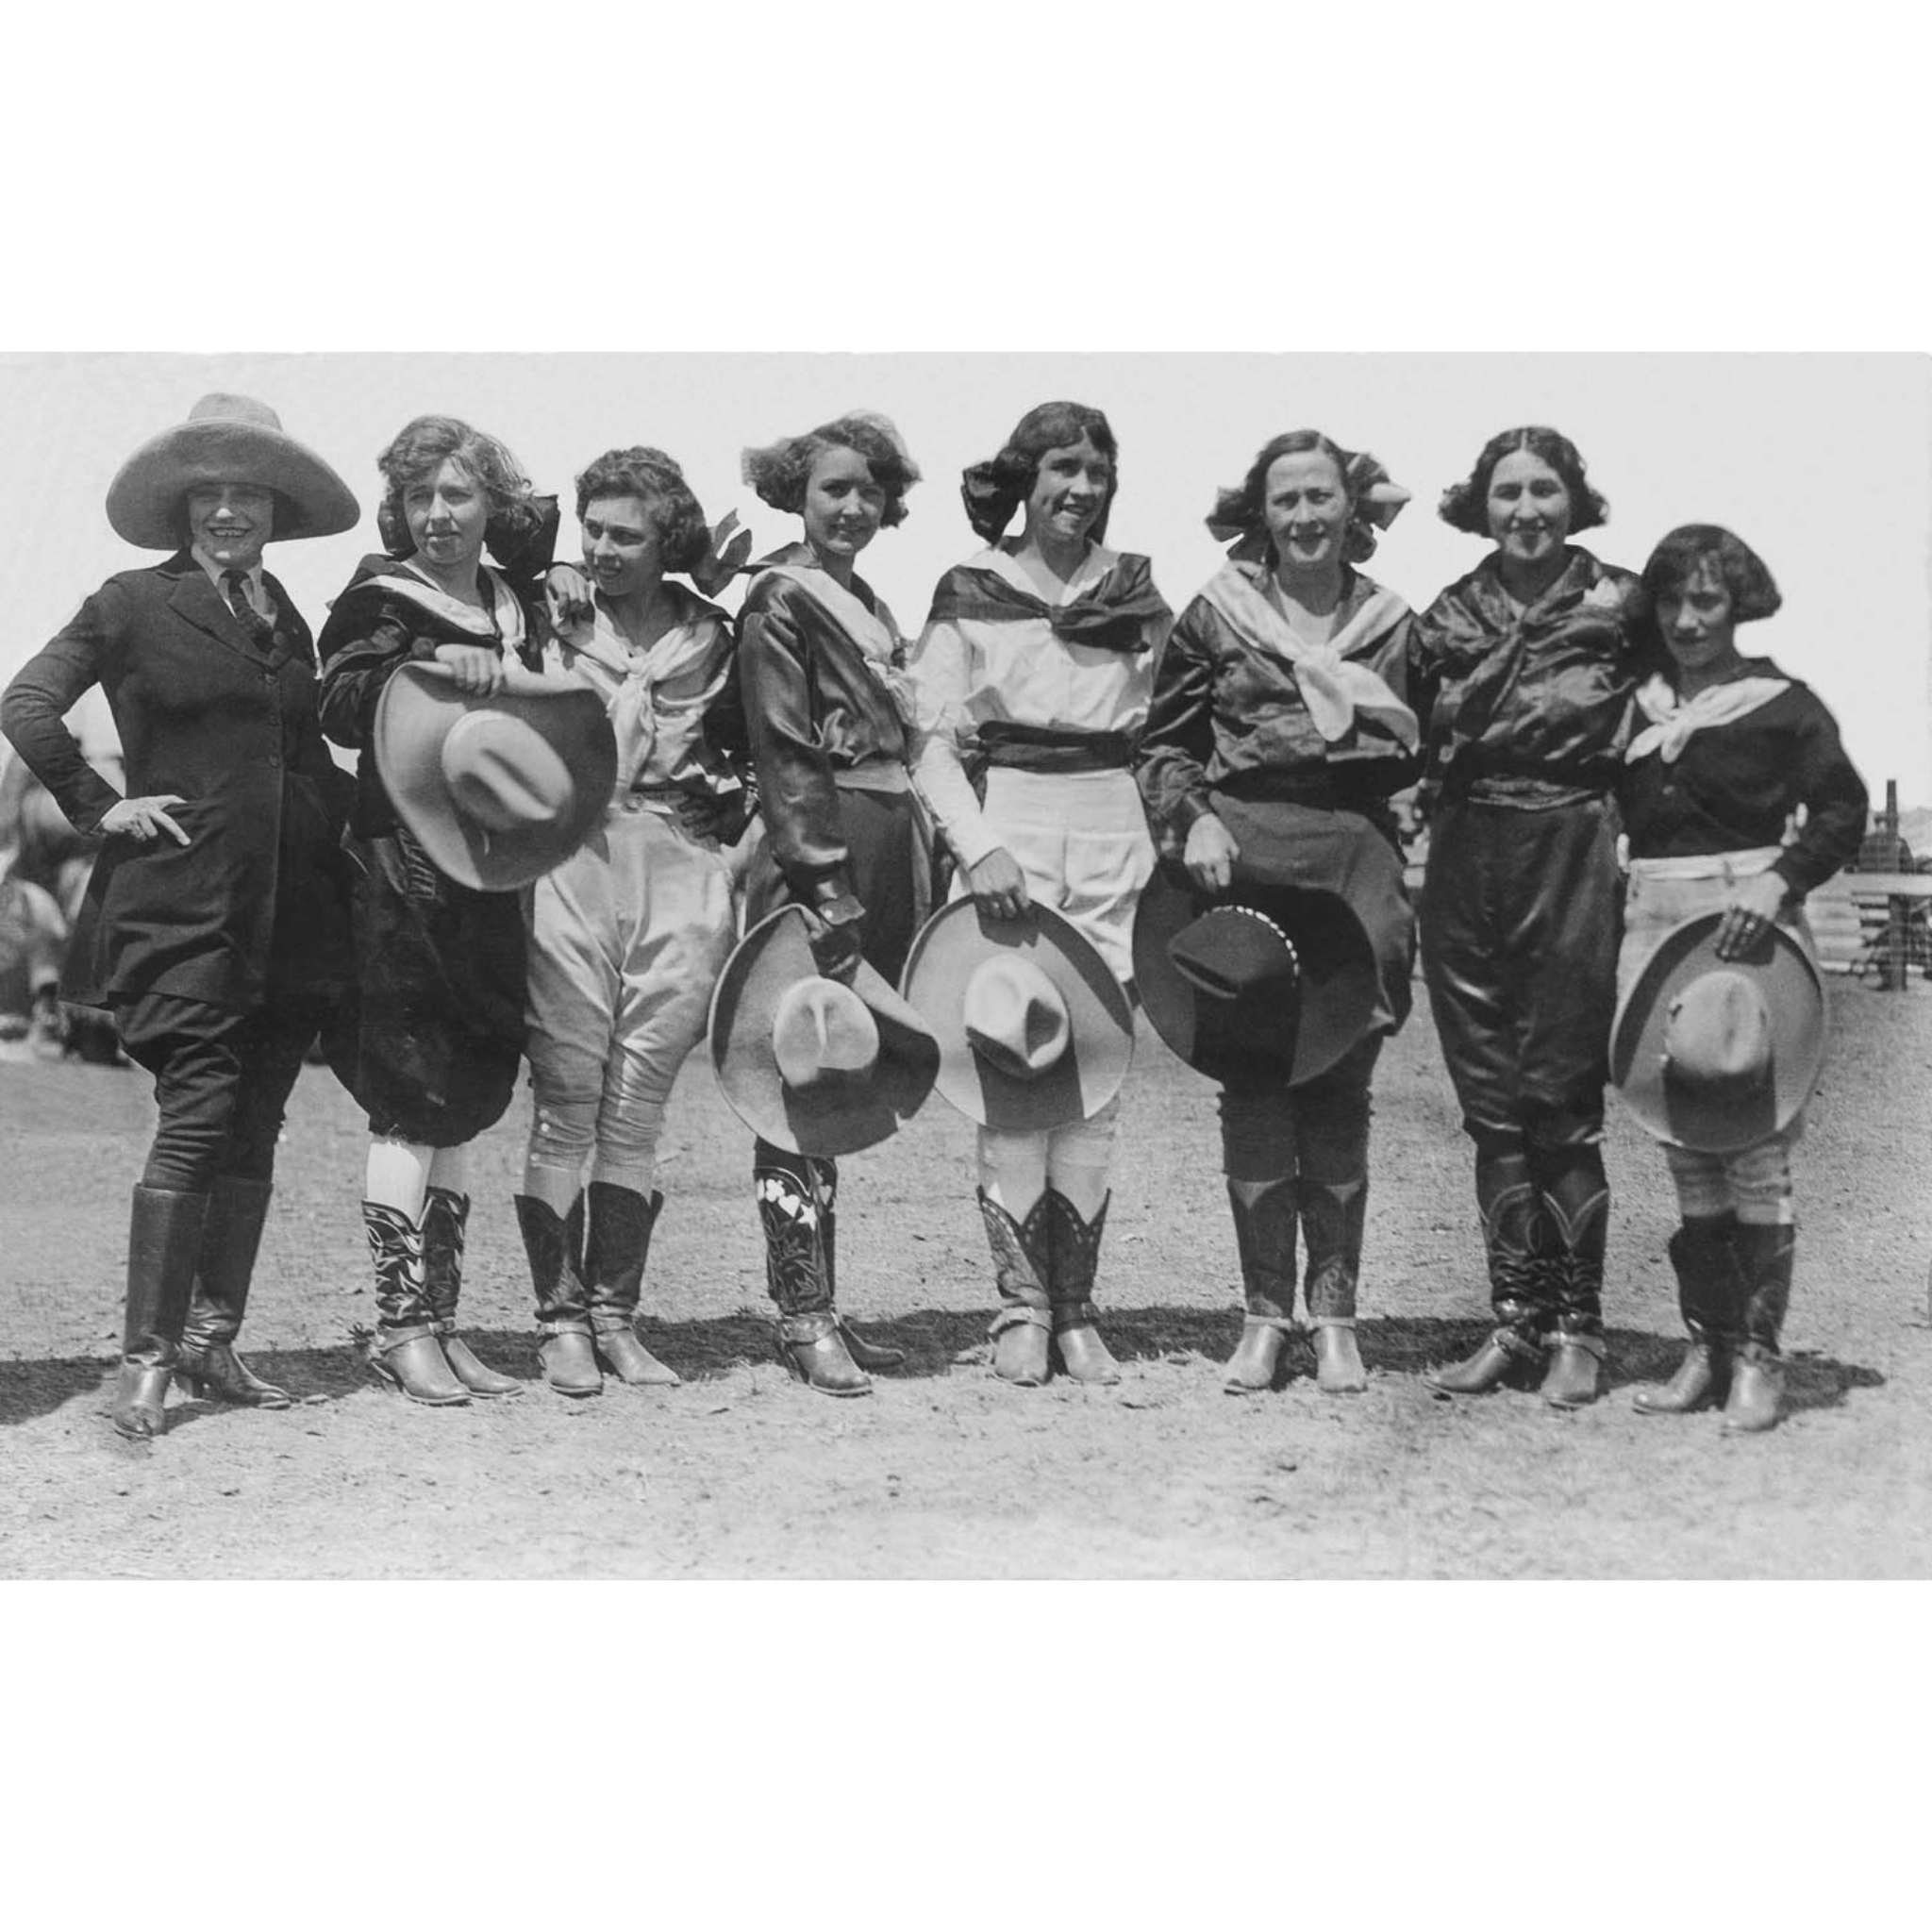 Rodeo Cowgirls 2 - Doubleday - ca. 1925 Photograph